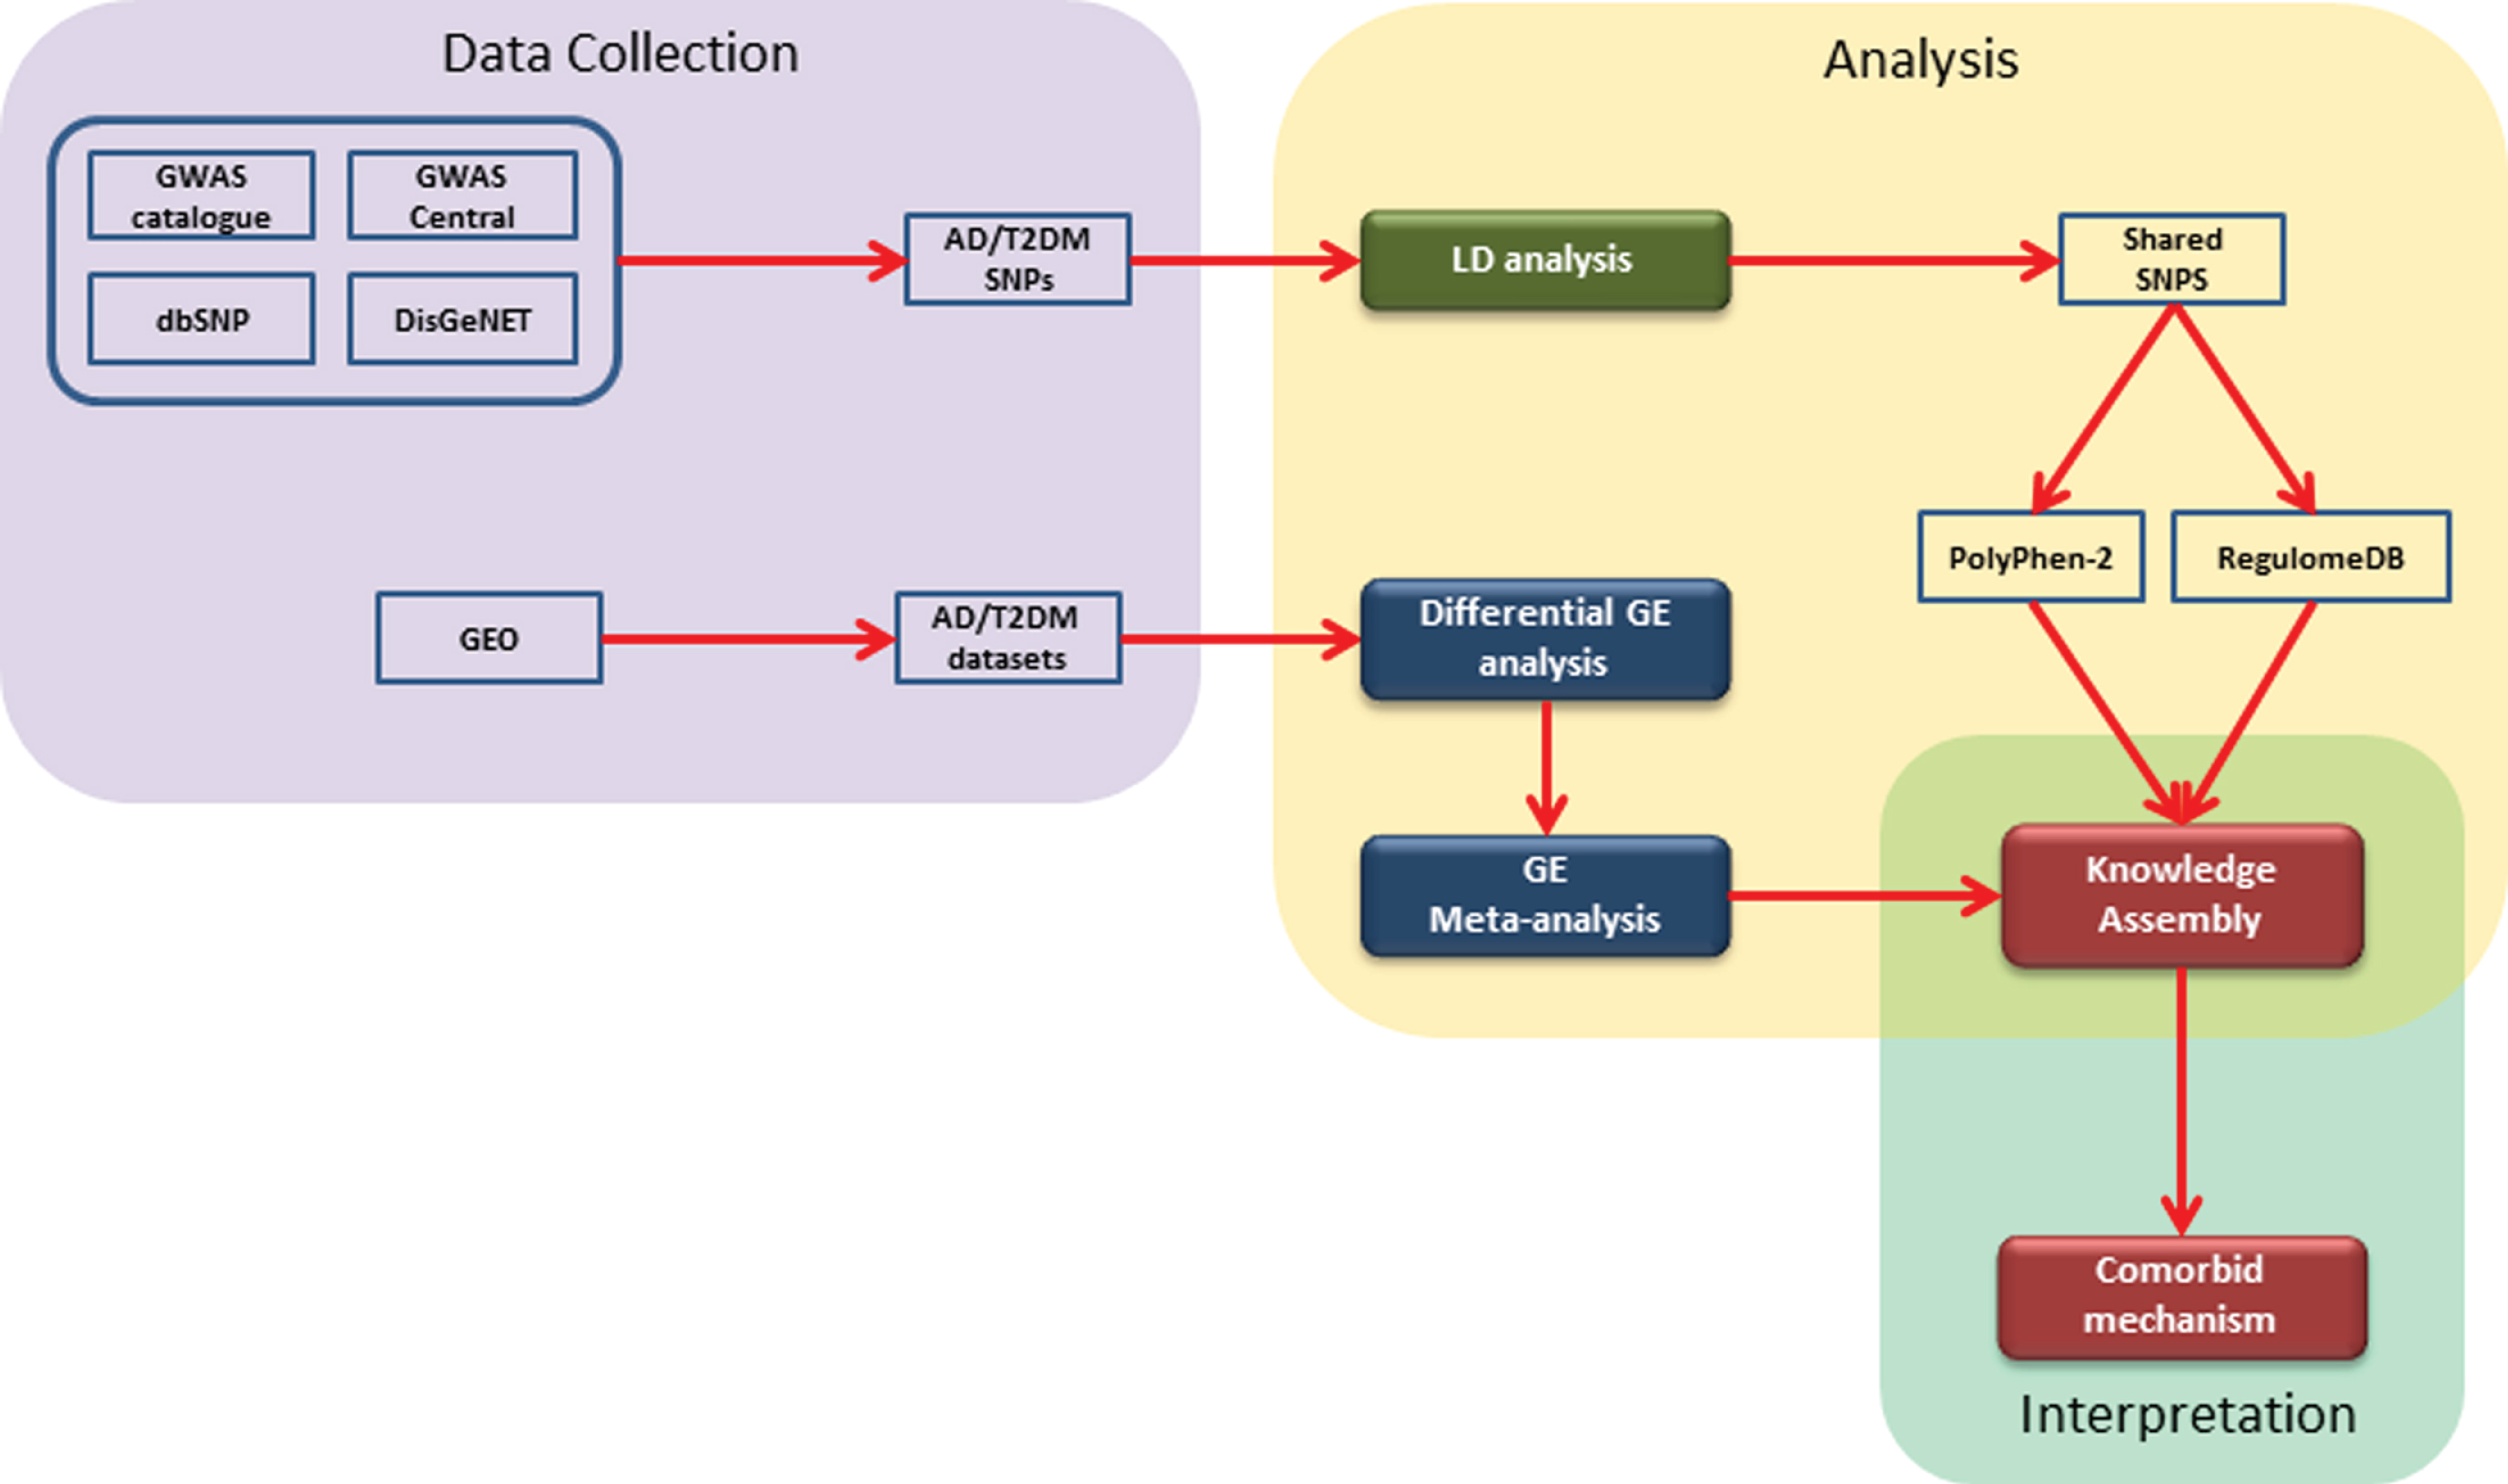 A schematic representation of the implemented workflow: The steps involved are 1) collection of genomic and gene expression data from open and freely accessible databases; 2) analysis of data using available tools and packages; and 3) construction of literature derived knowledge assembly and comorbid interpretation.